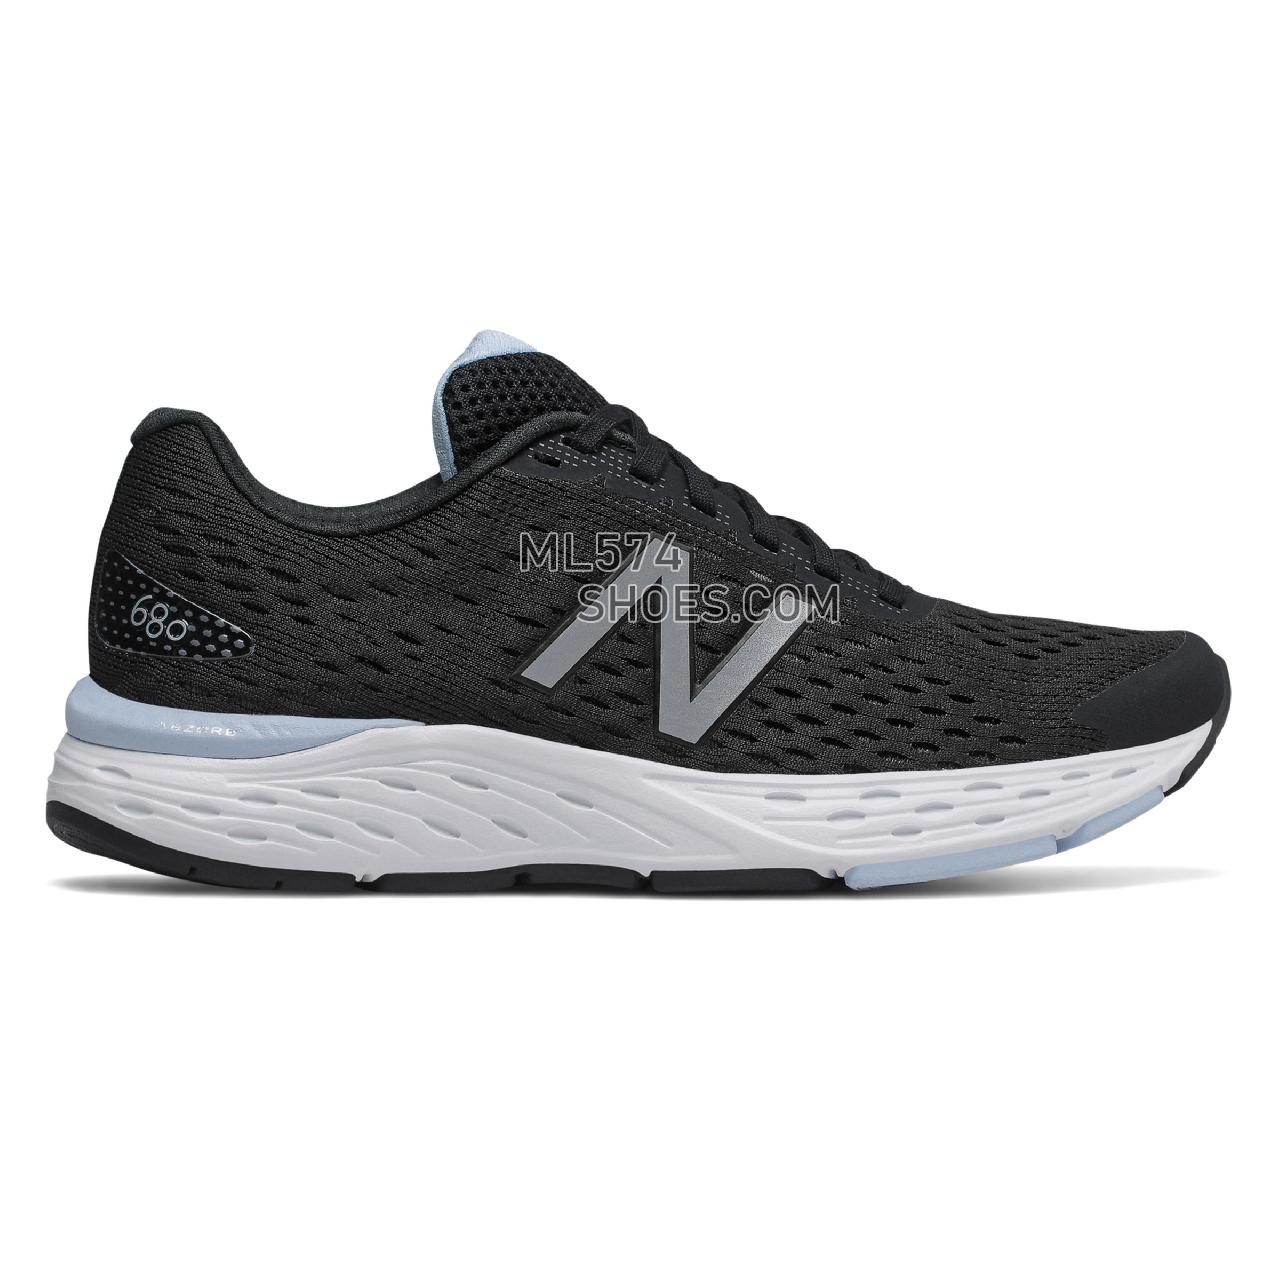 New Balance 680v6 - Women's Classic Sneakers - Black with Air - W680LK6